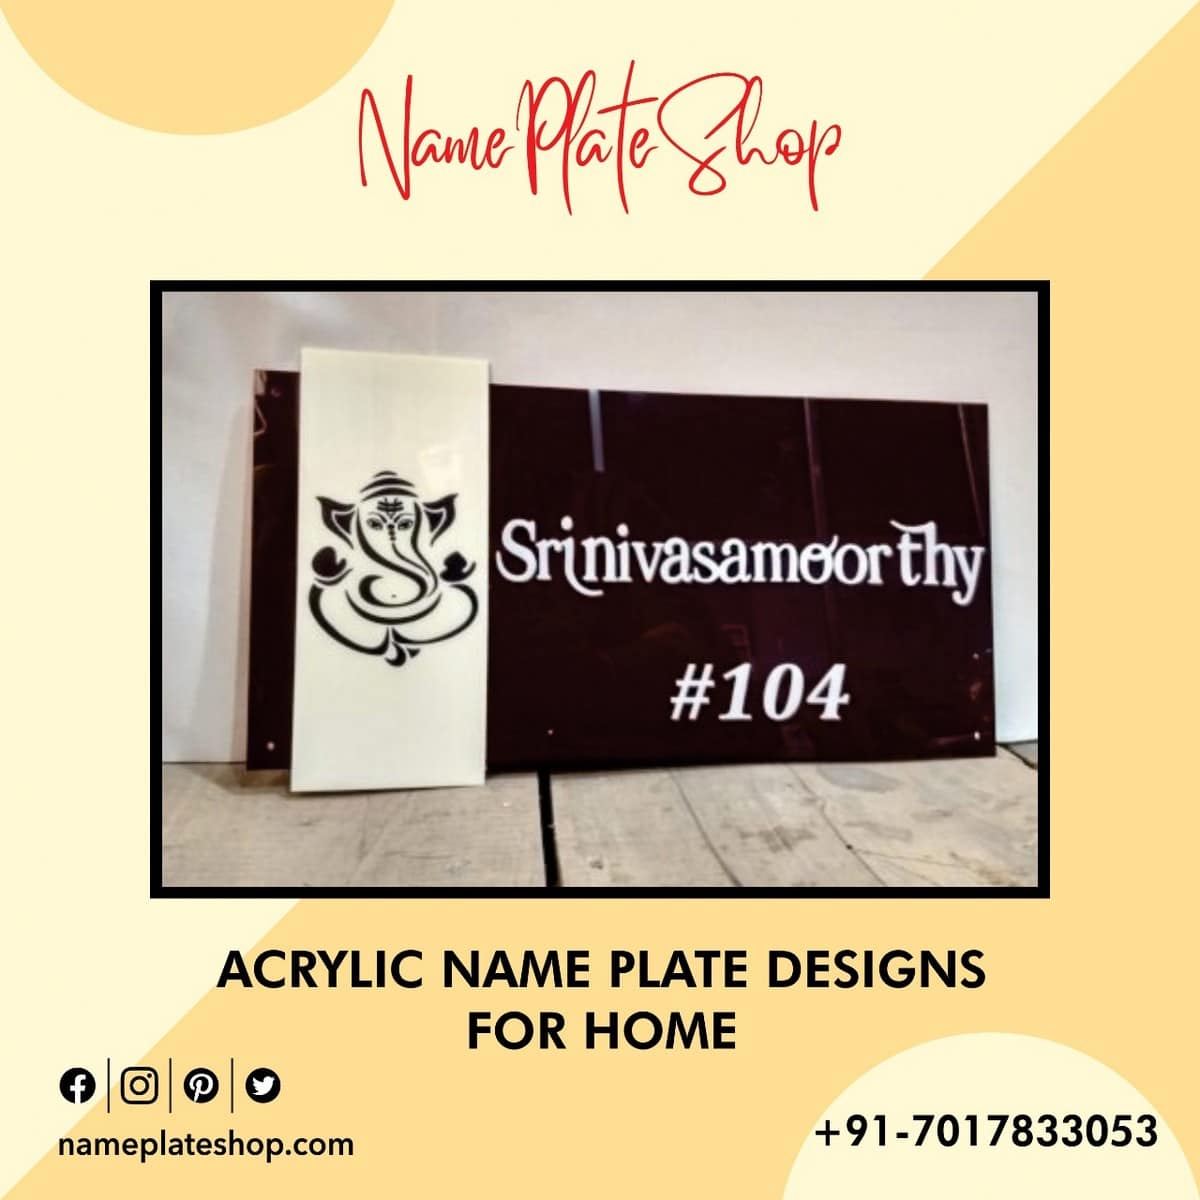 Acrylic Name Plate Designs For Home